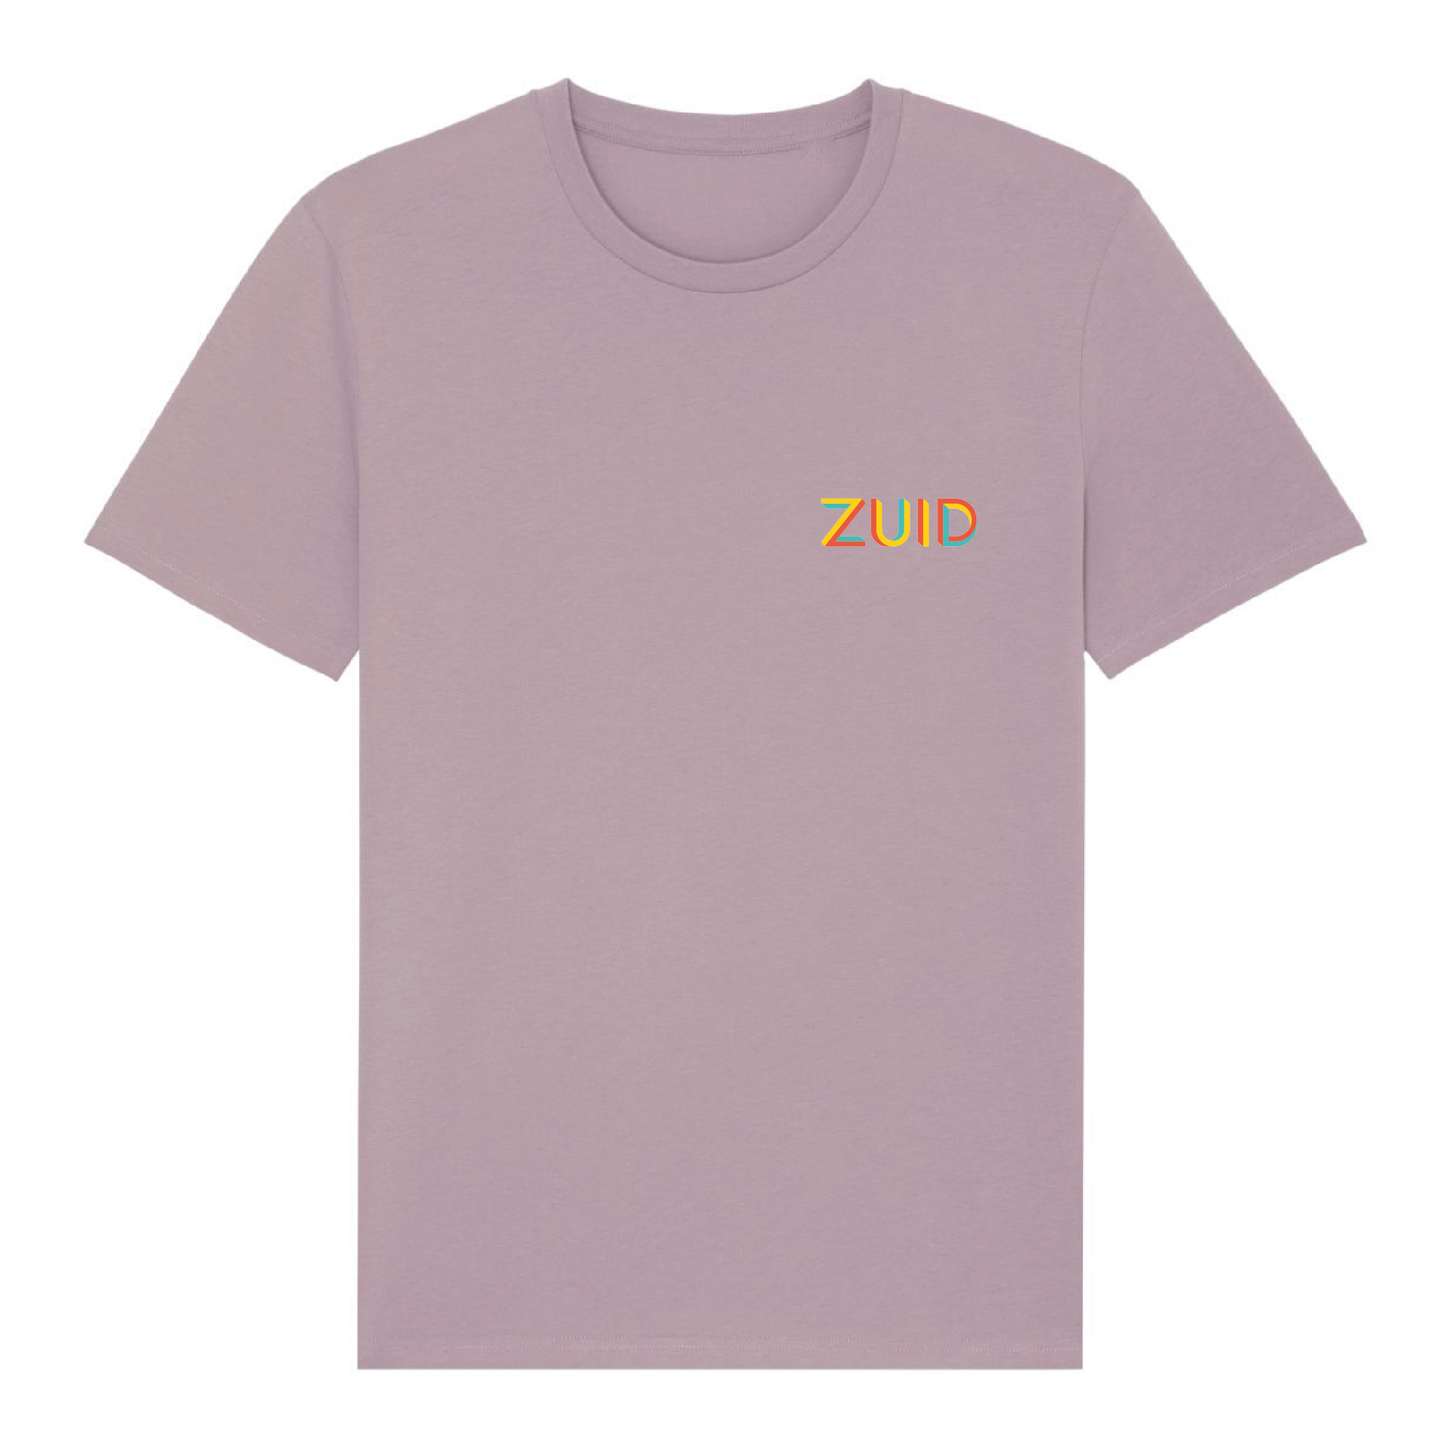 Zuid Color T-shirt Lilac P